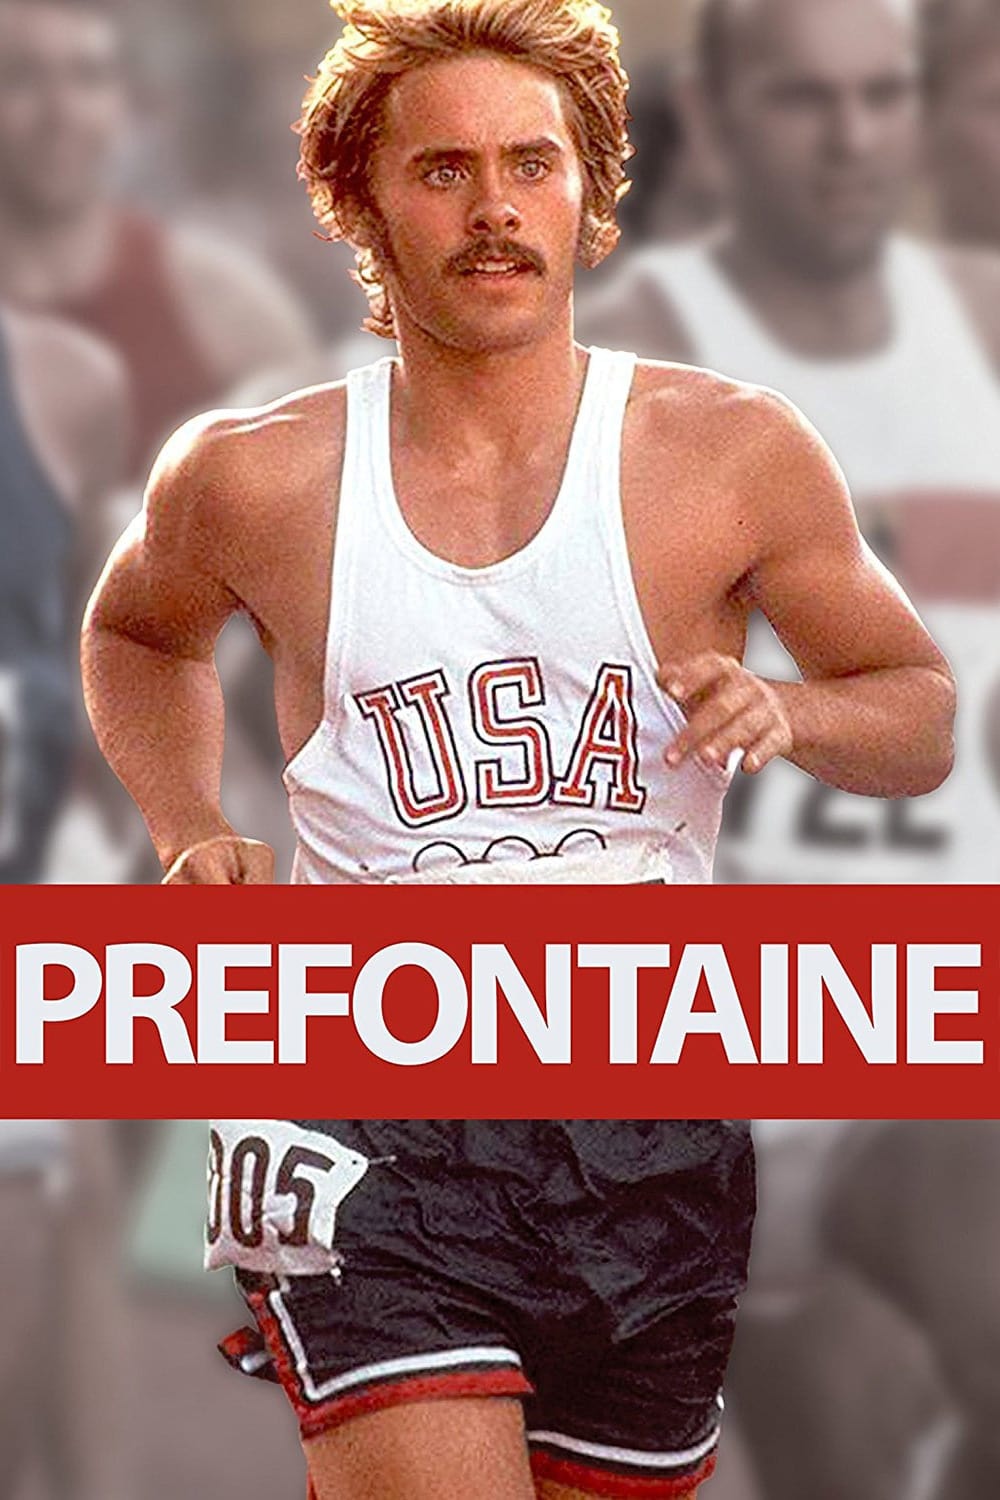 Prefontaine streaming